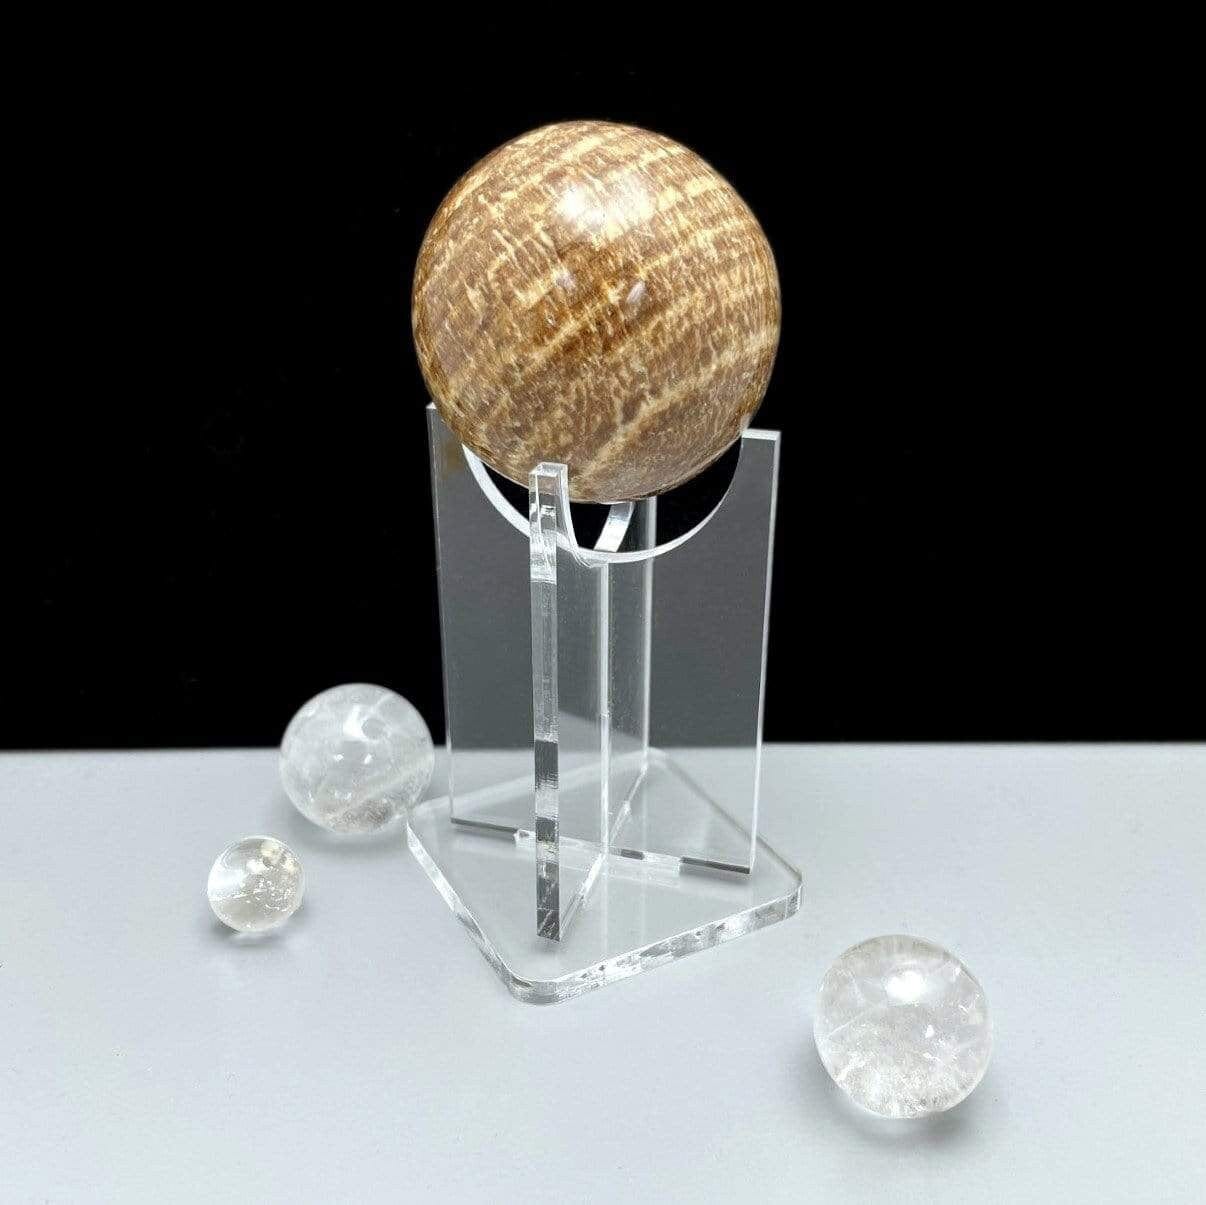 Acrylic Sphere Holder - Crystal Stand with a sphere on top